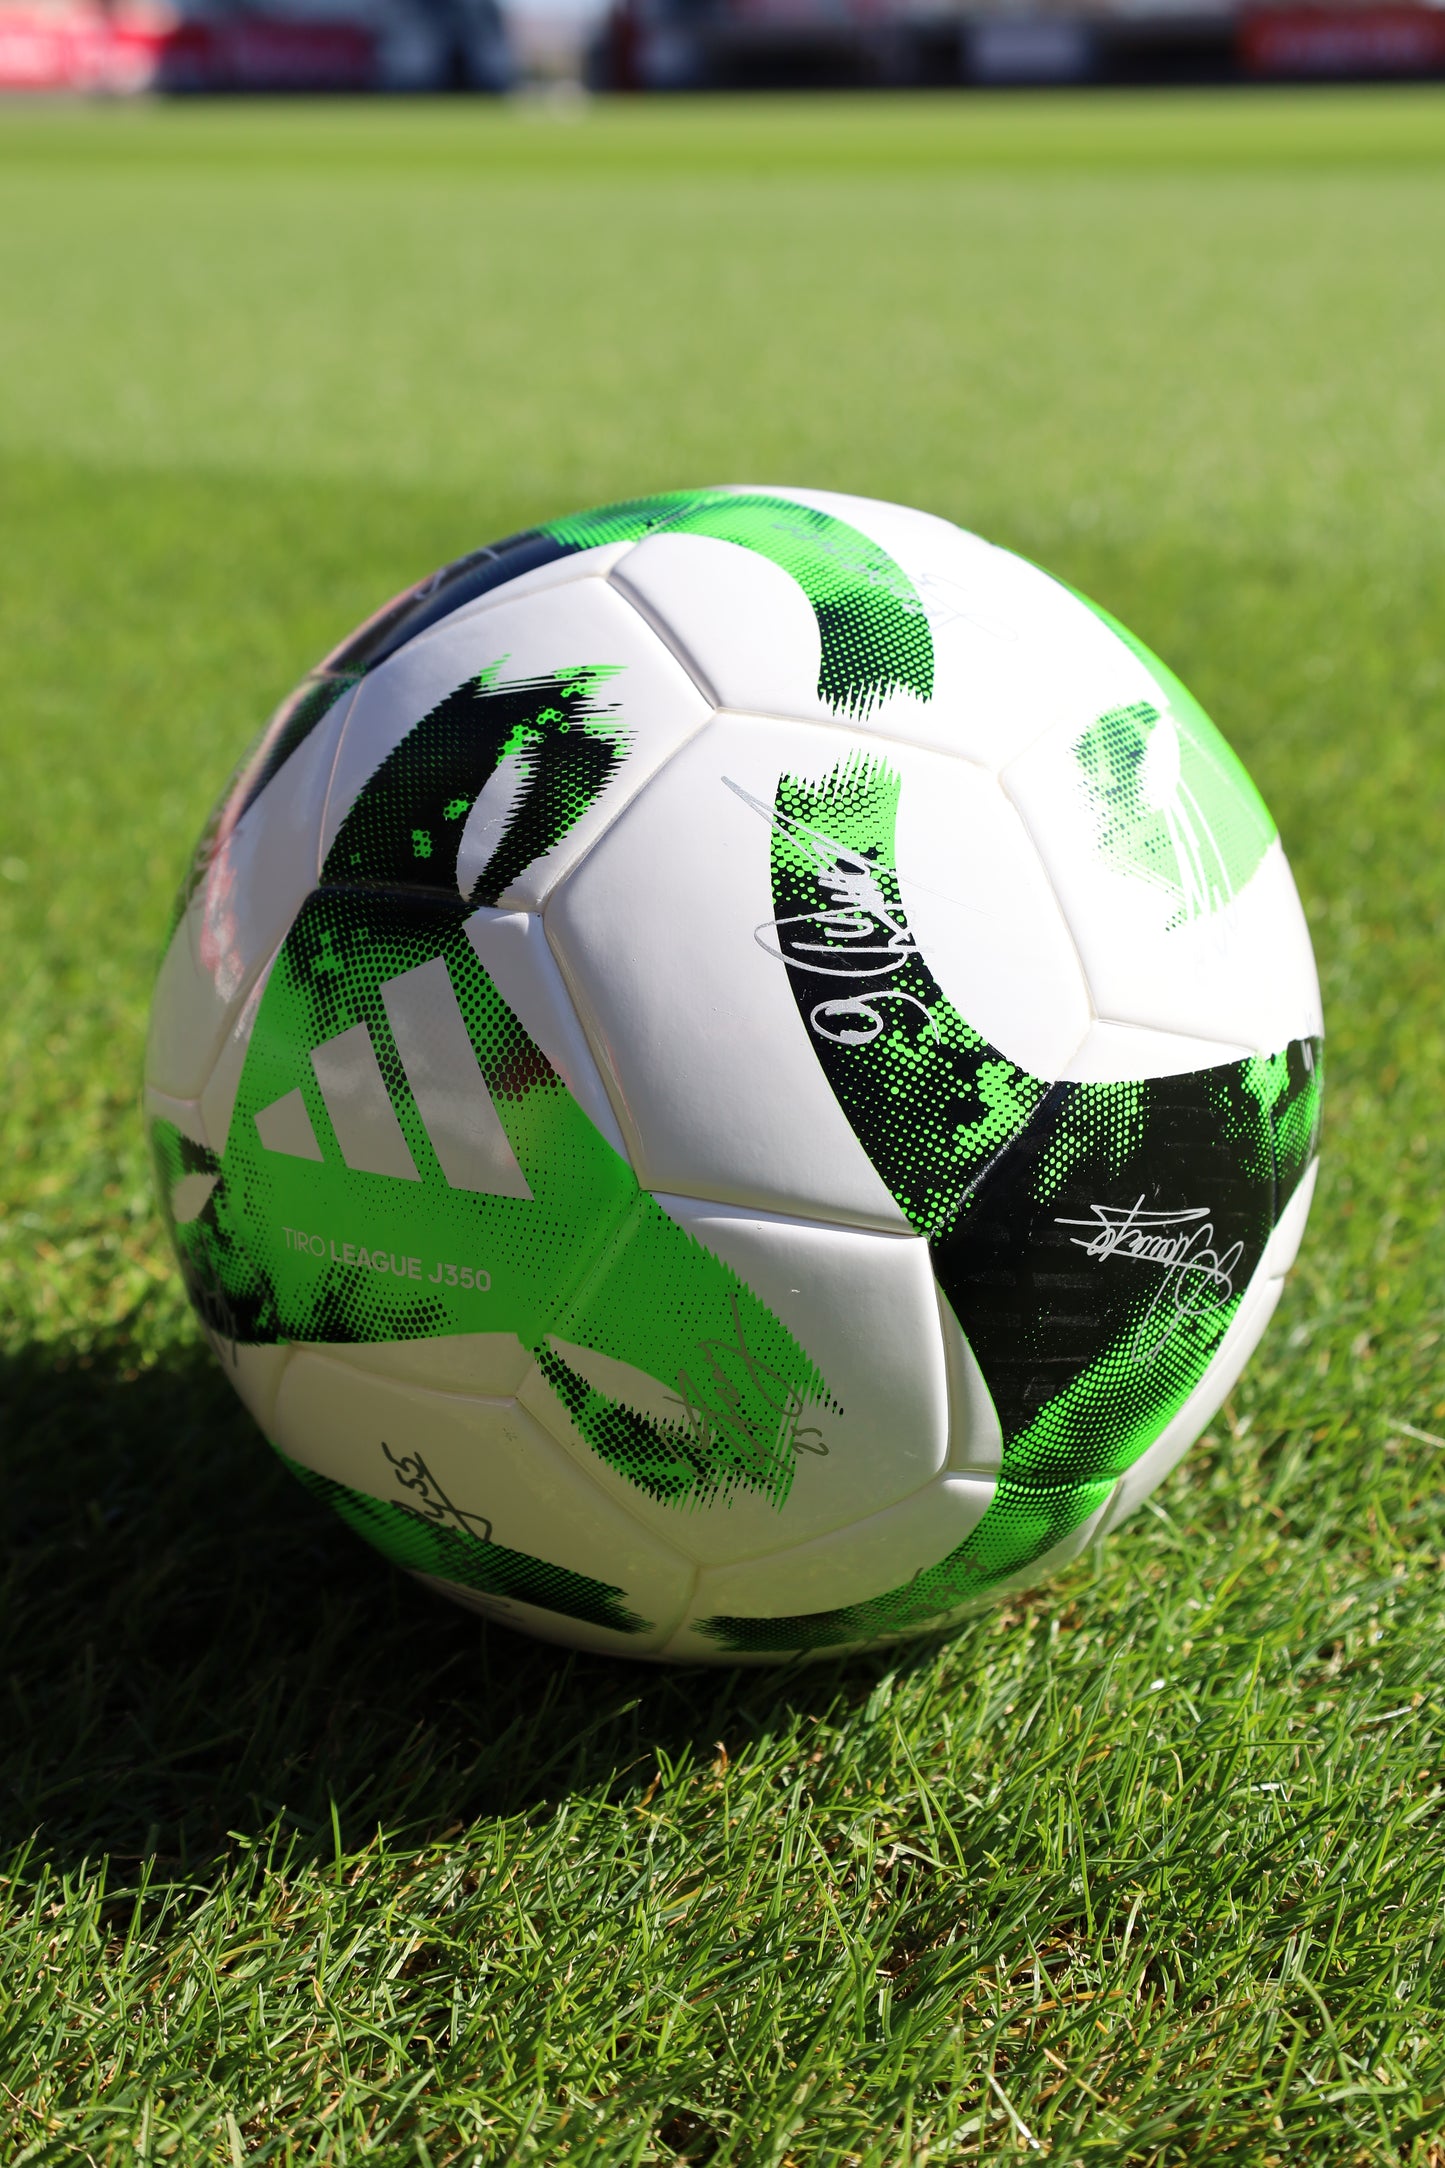 ADIDAS BALL WITH THE SIGNATURES OF THE SEPSI OSK TEAM PLAYERS